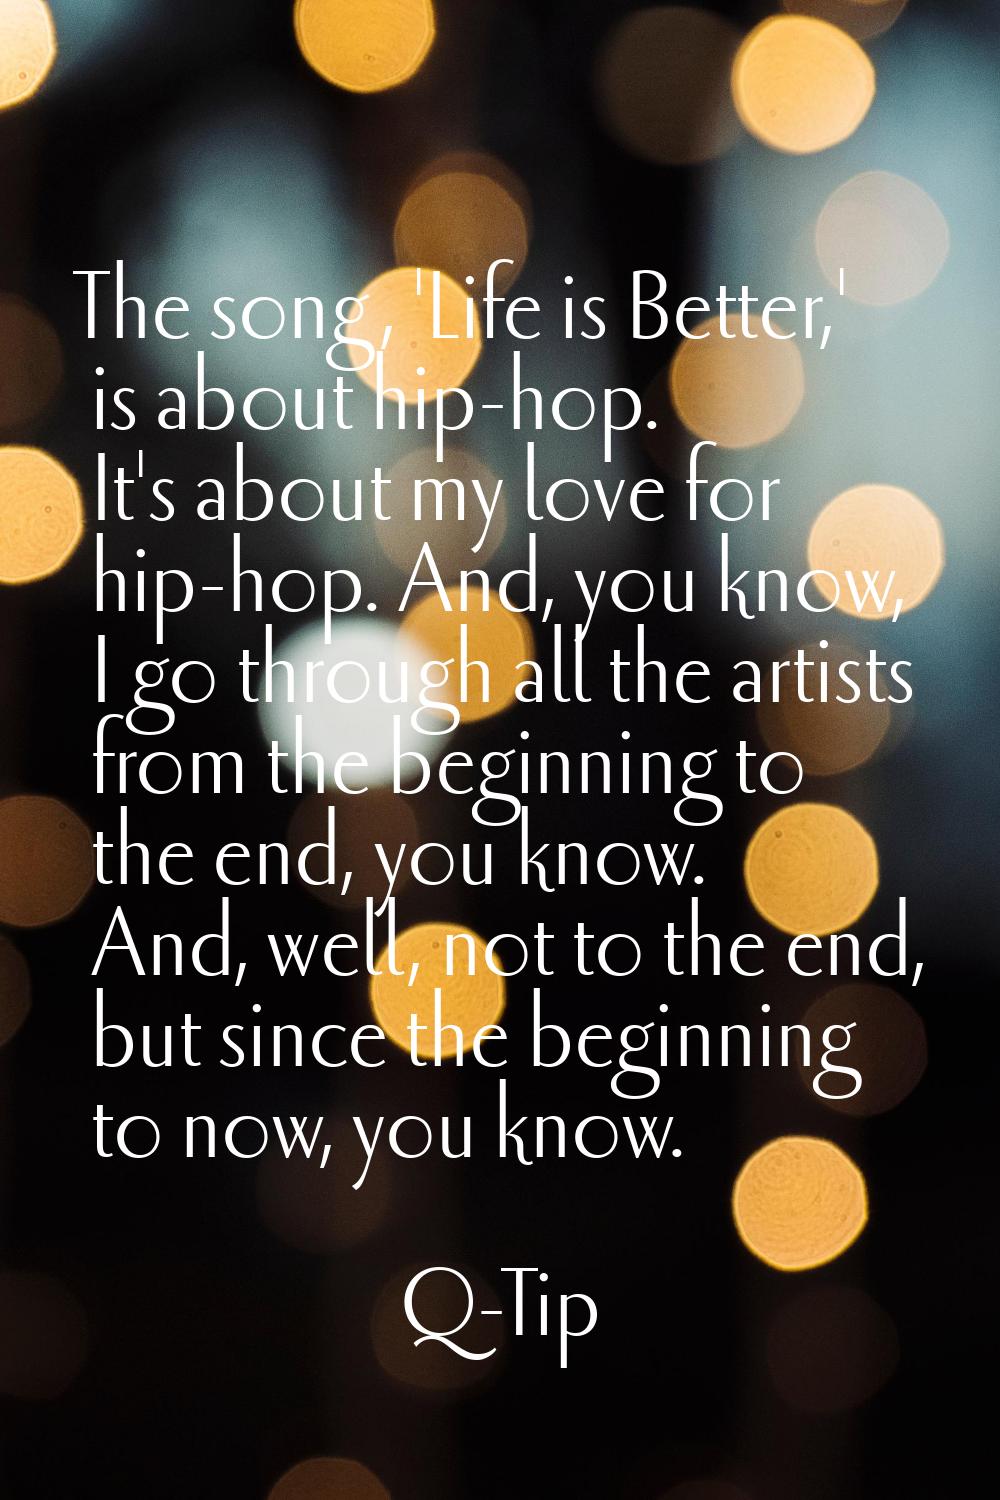 The song, 'Life is Better,' is about hip-hop. It's about my love for hip-hop. And, you know, I go t